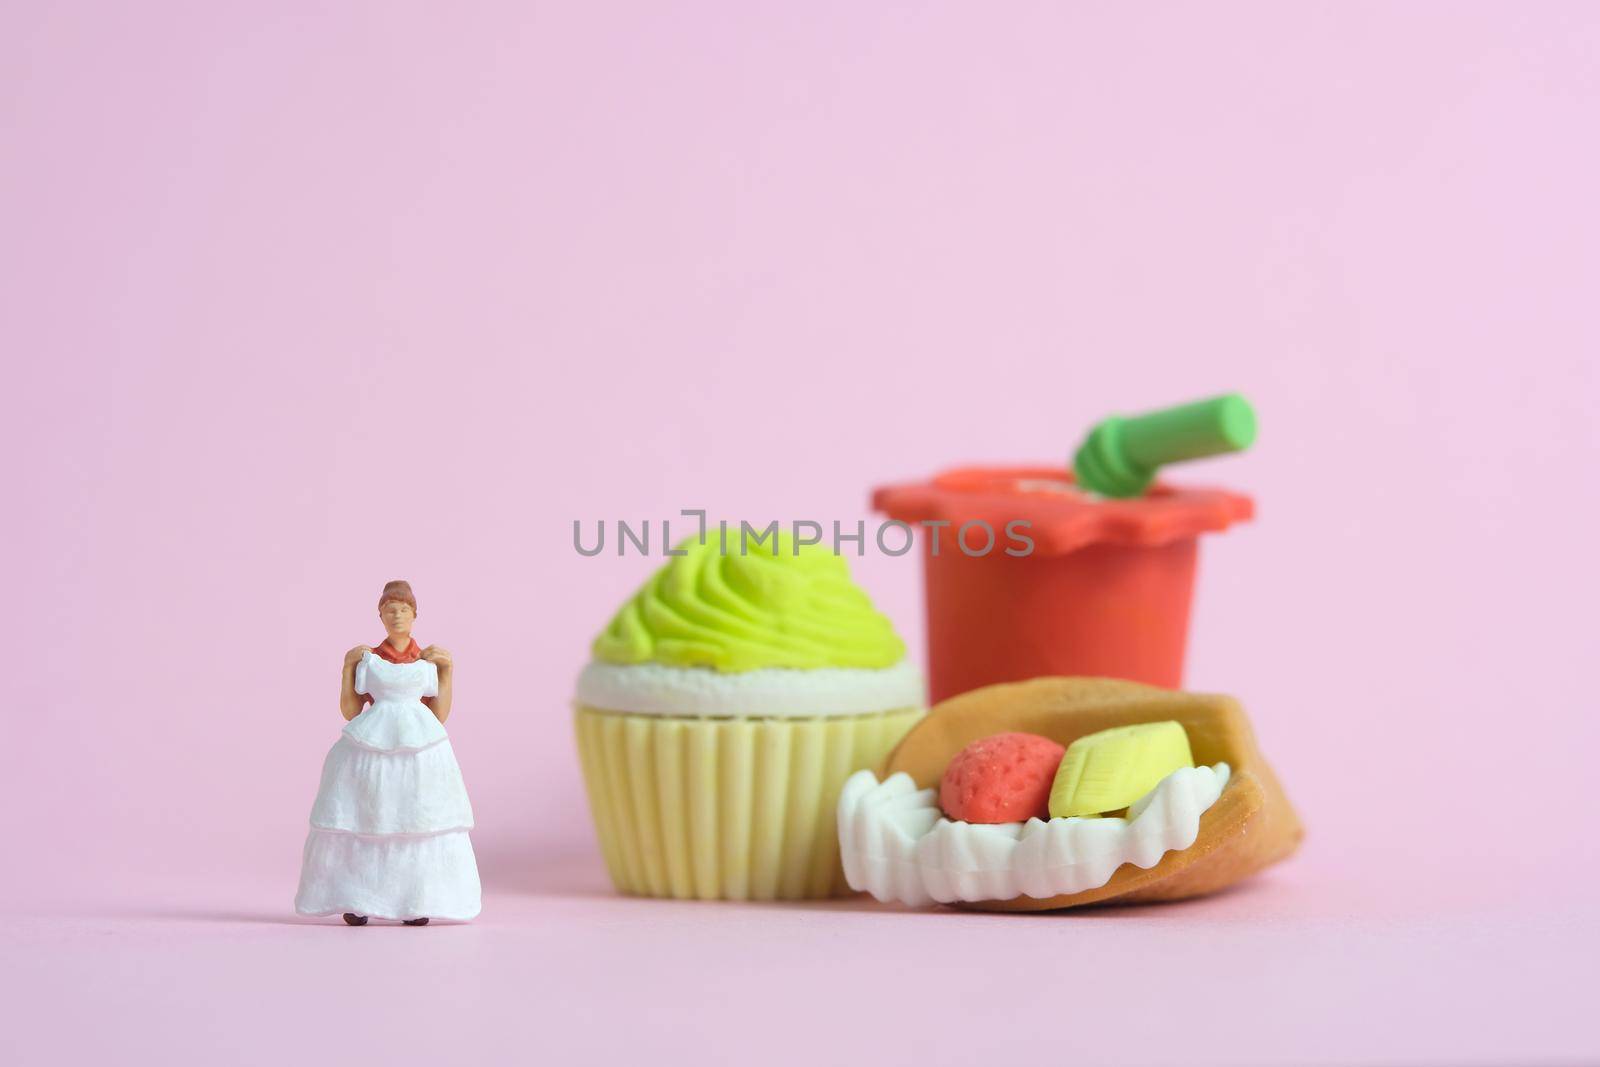 Woman dieting from junk food before wedding day concept. Miniature people toys photography, girl holding wedding dress. Image photo by Macrostud